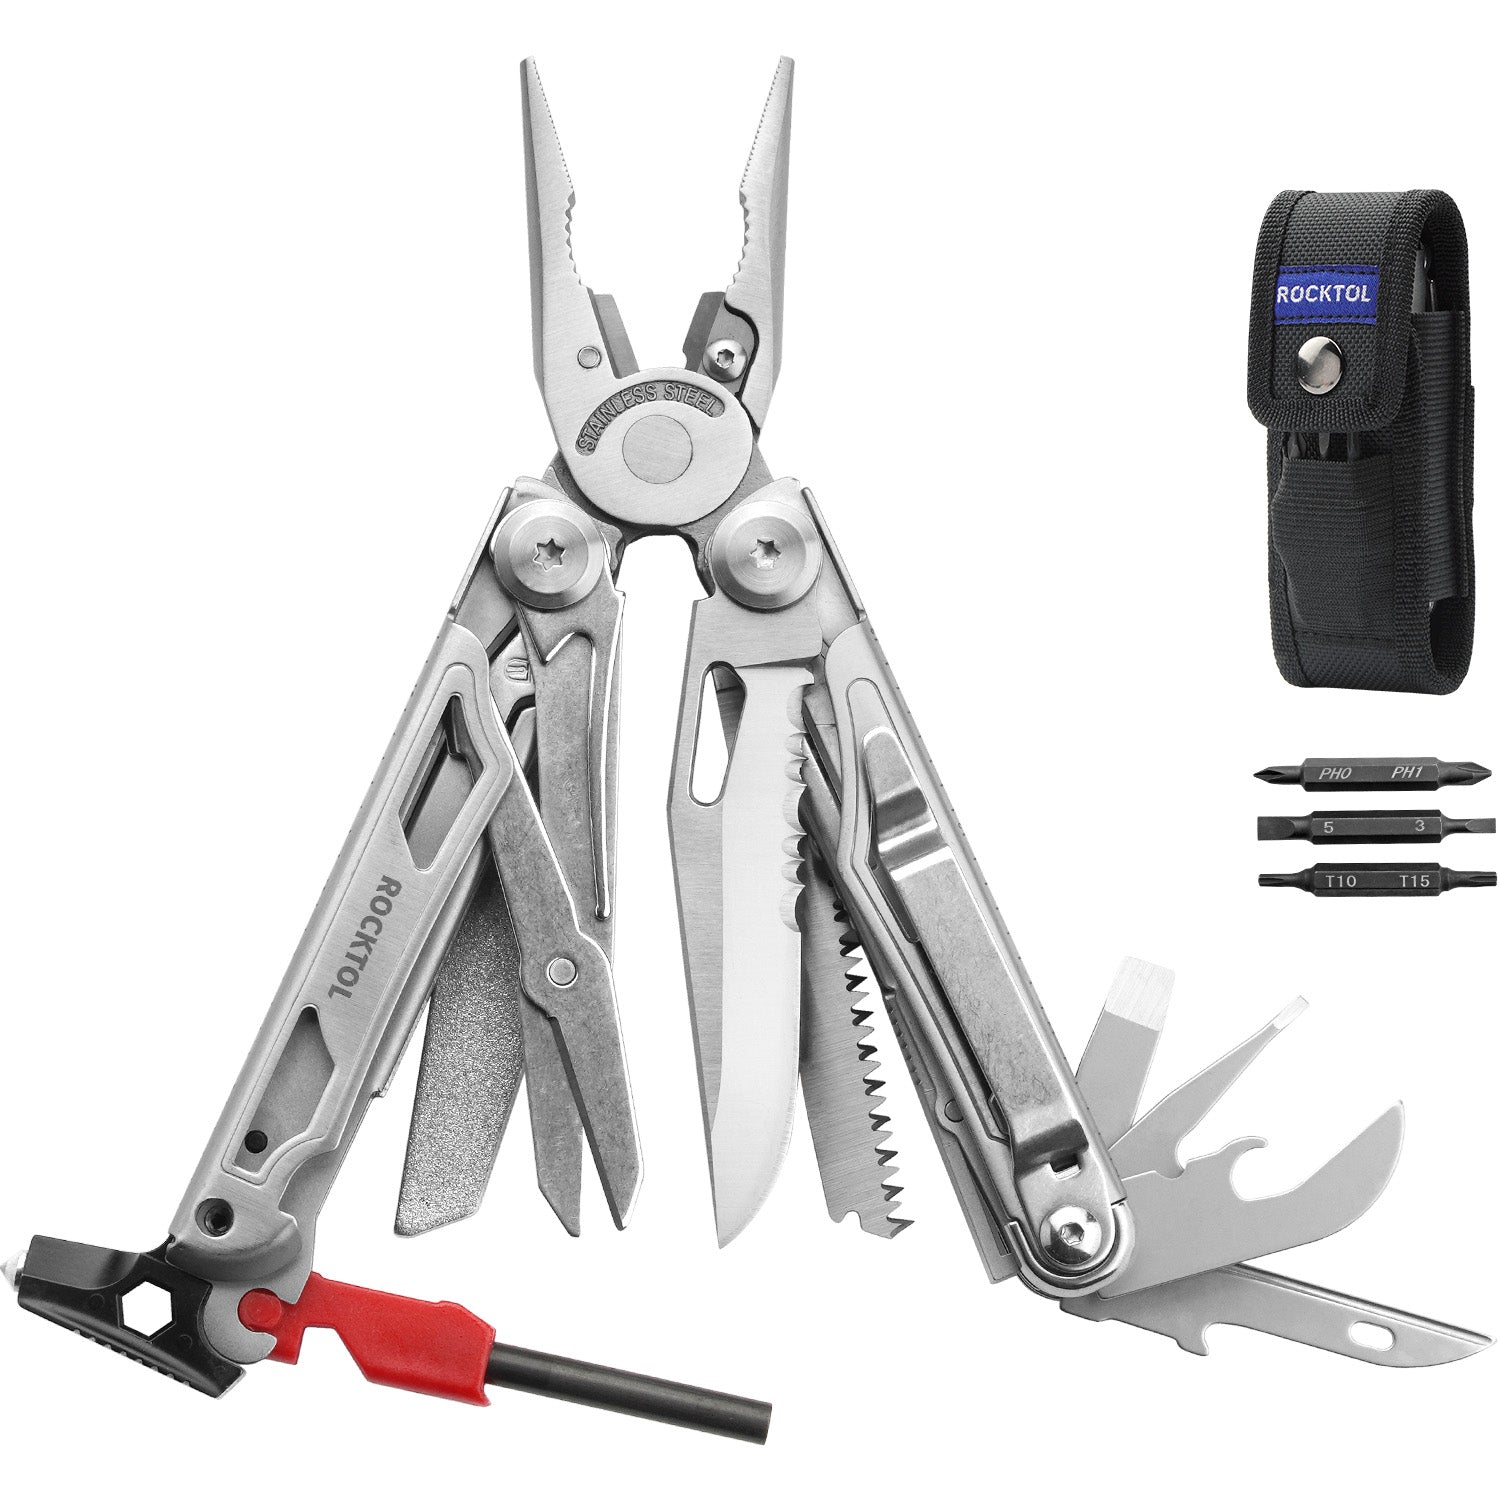 ROCKTOL Multitool Pliers, 22-in-1 Camping Multitool with Fire